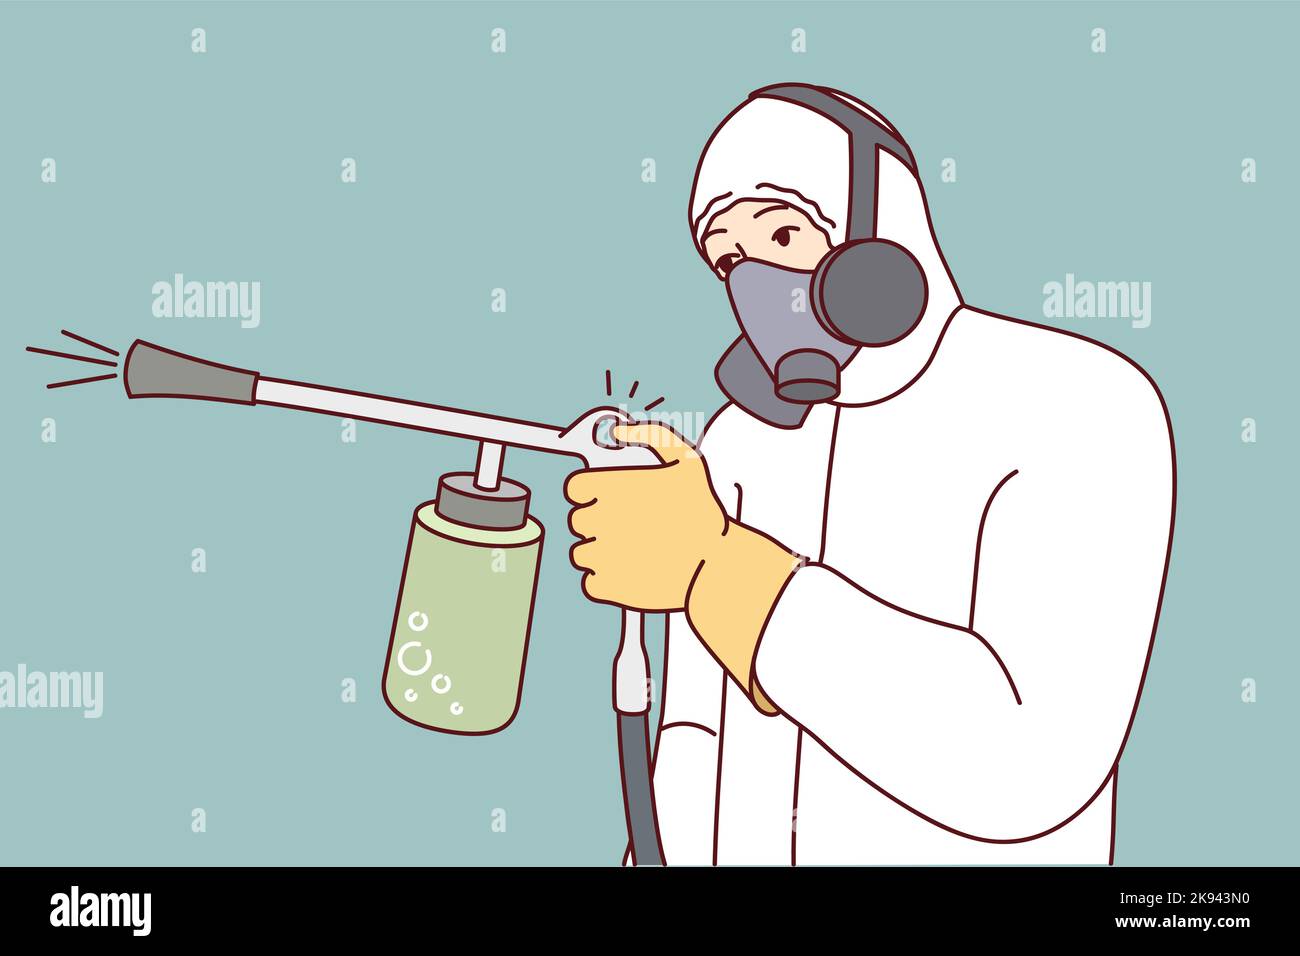 Man in protective uniform spraying pesticide to kill insects and rodents. Male exterminator or pest control worker in suit doing disinfection. Vector illustration.  Stock Vector